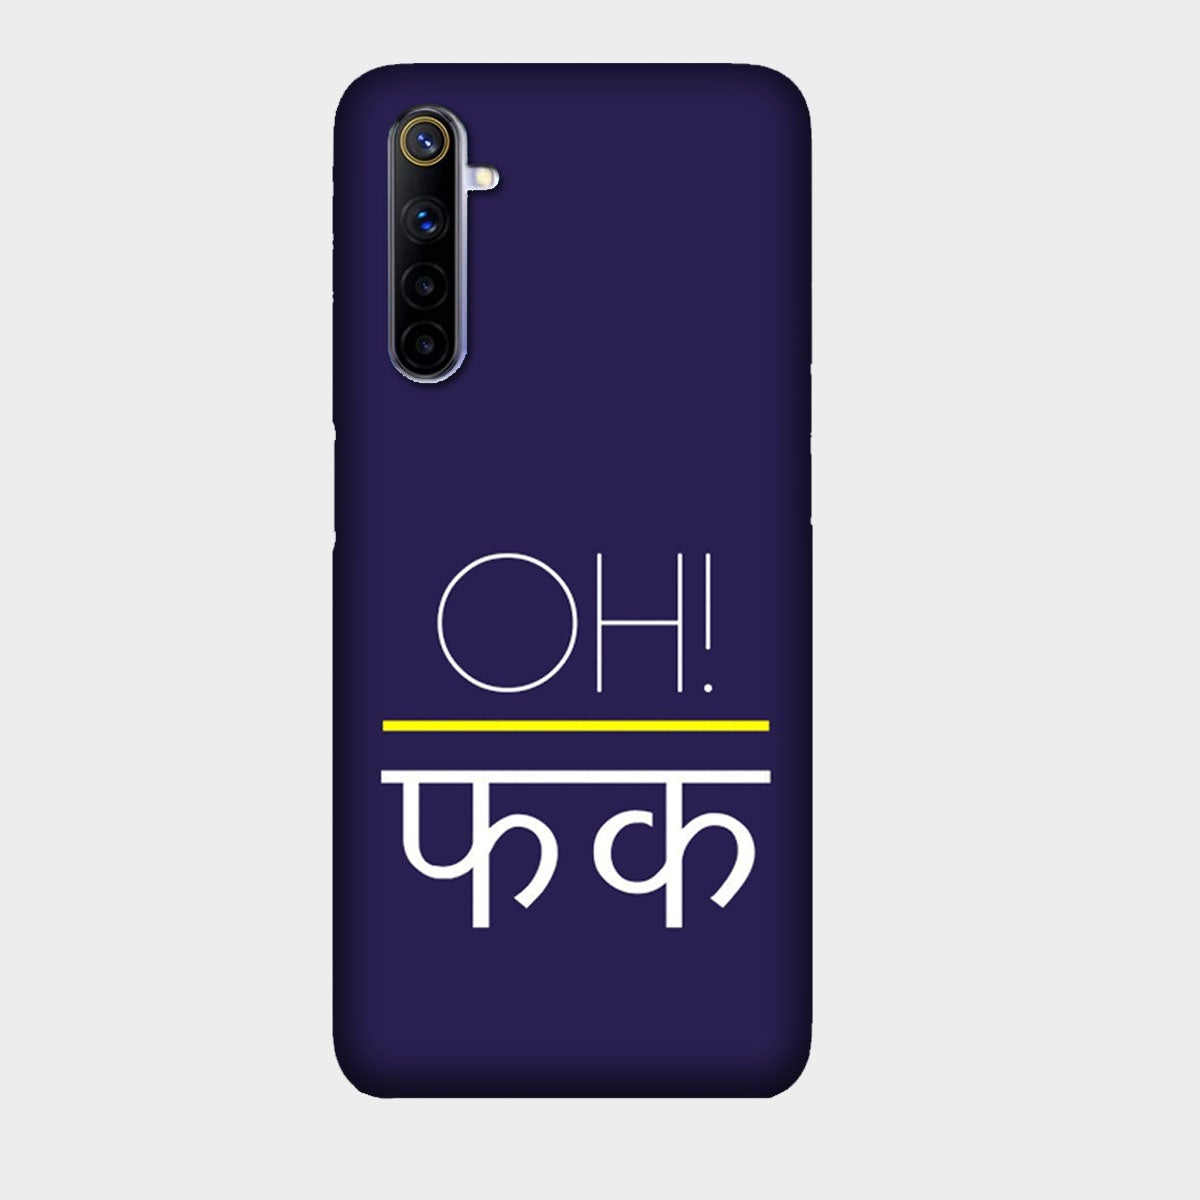 Oh Fxck - Mobile Phone Cover - Hard Case